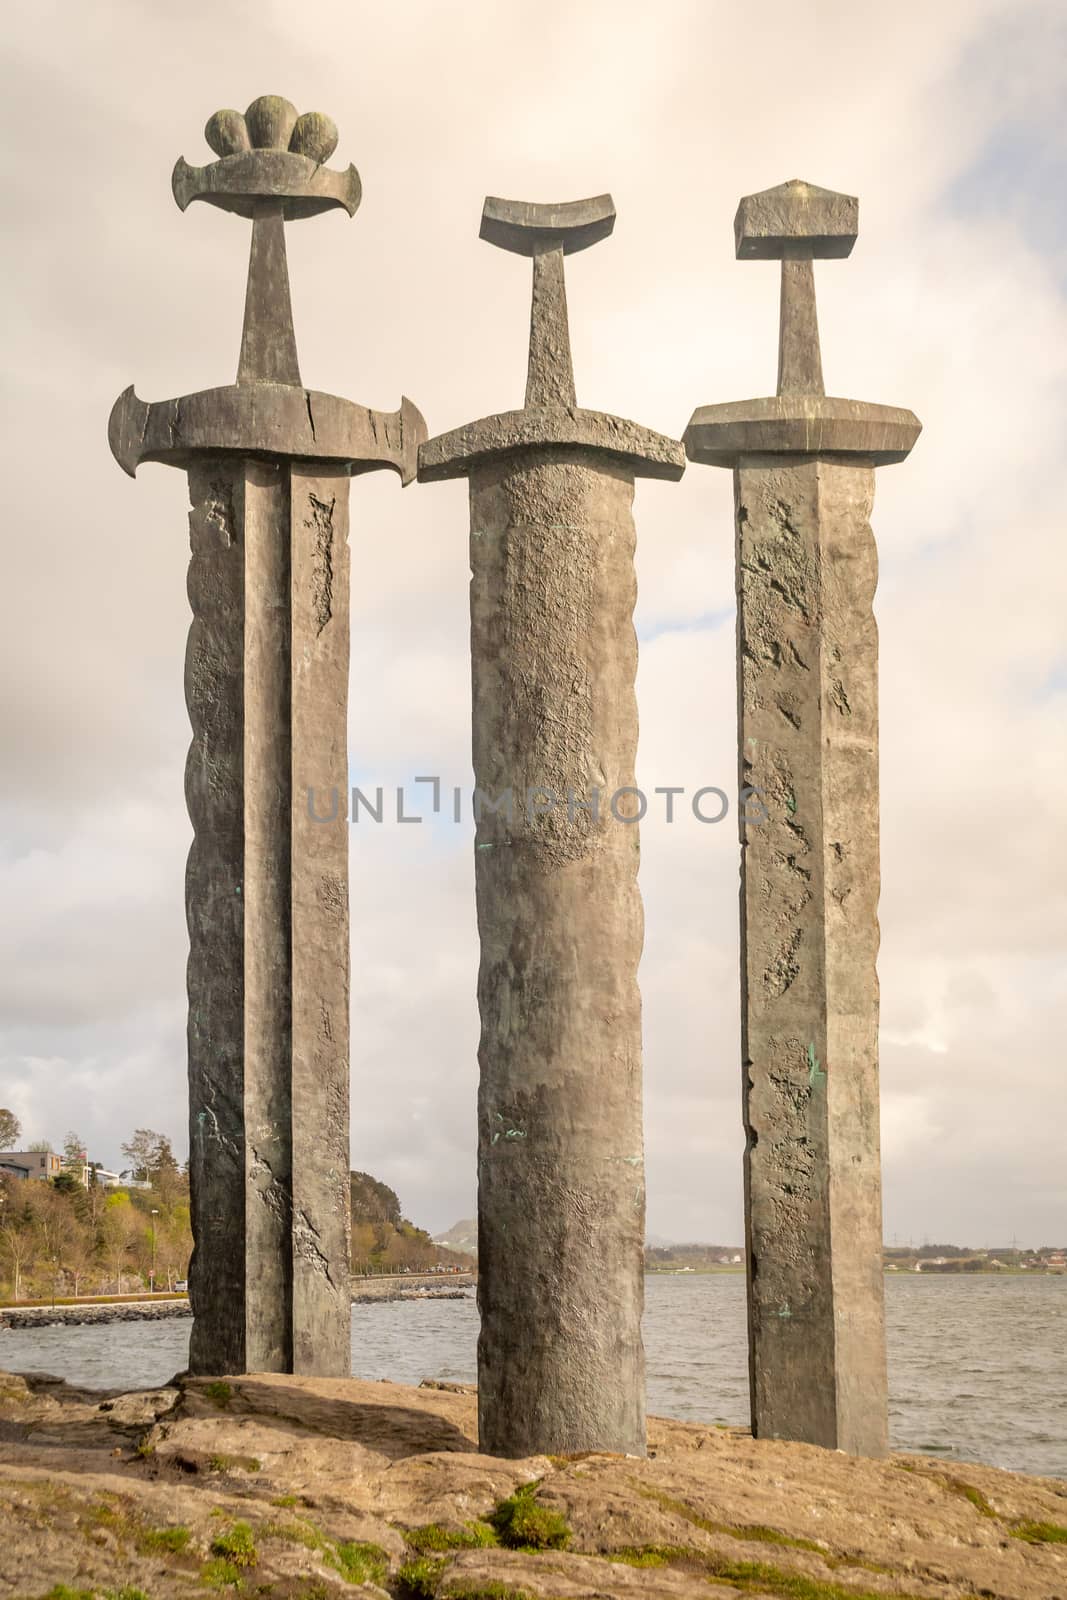 Hafrsfjord, Norway, May 2014: Swords in rock monument in Hafrsfjord, Norway, neighborhood of Madla, a borough city of Stavanger, created by Fritz Roed